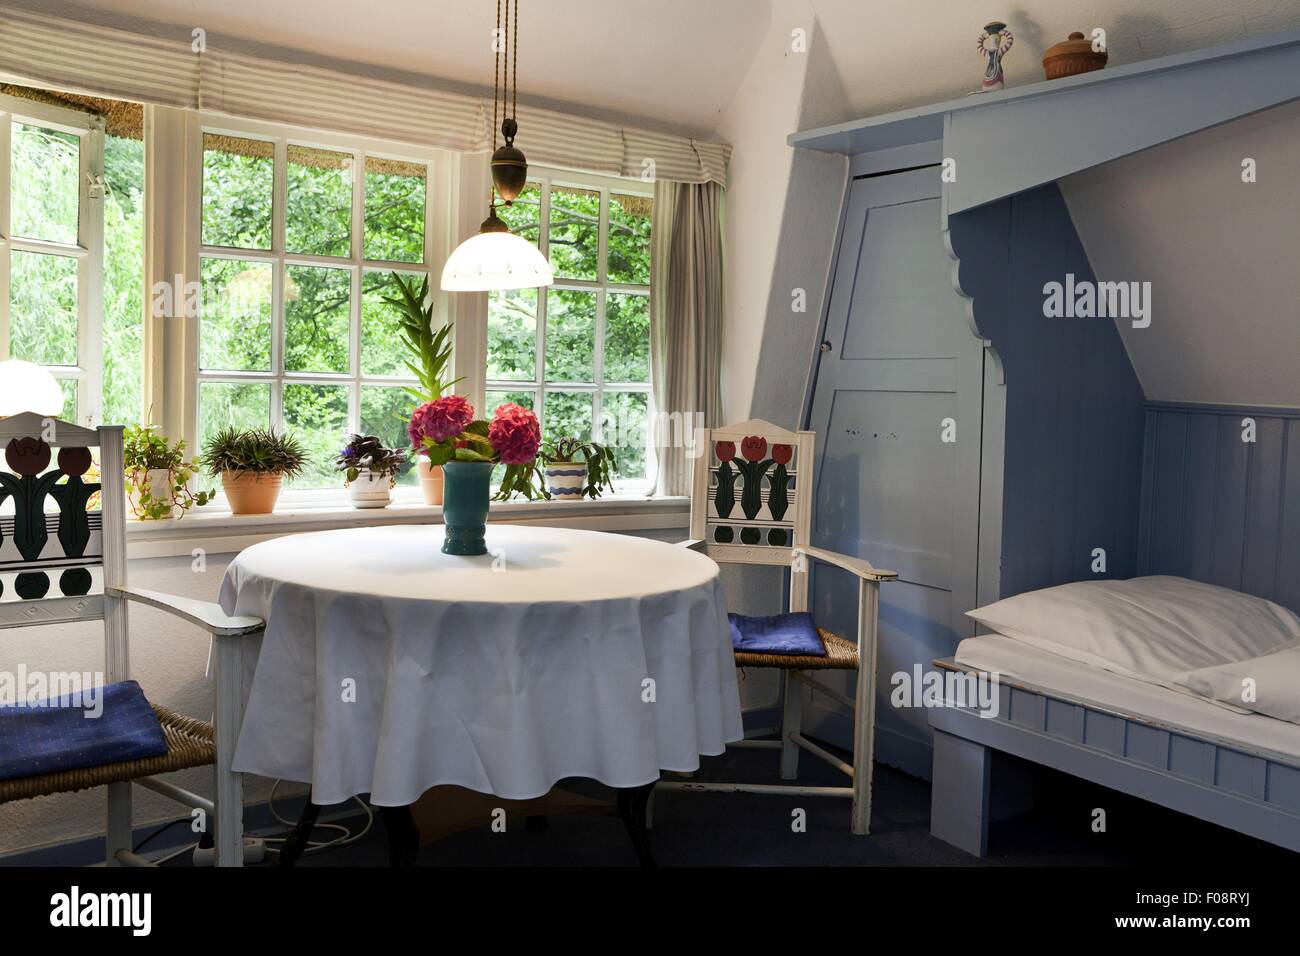 Interior of Pension House with table and chair, Worpswede, Germany Stock Photo